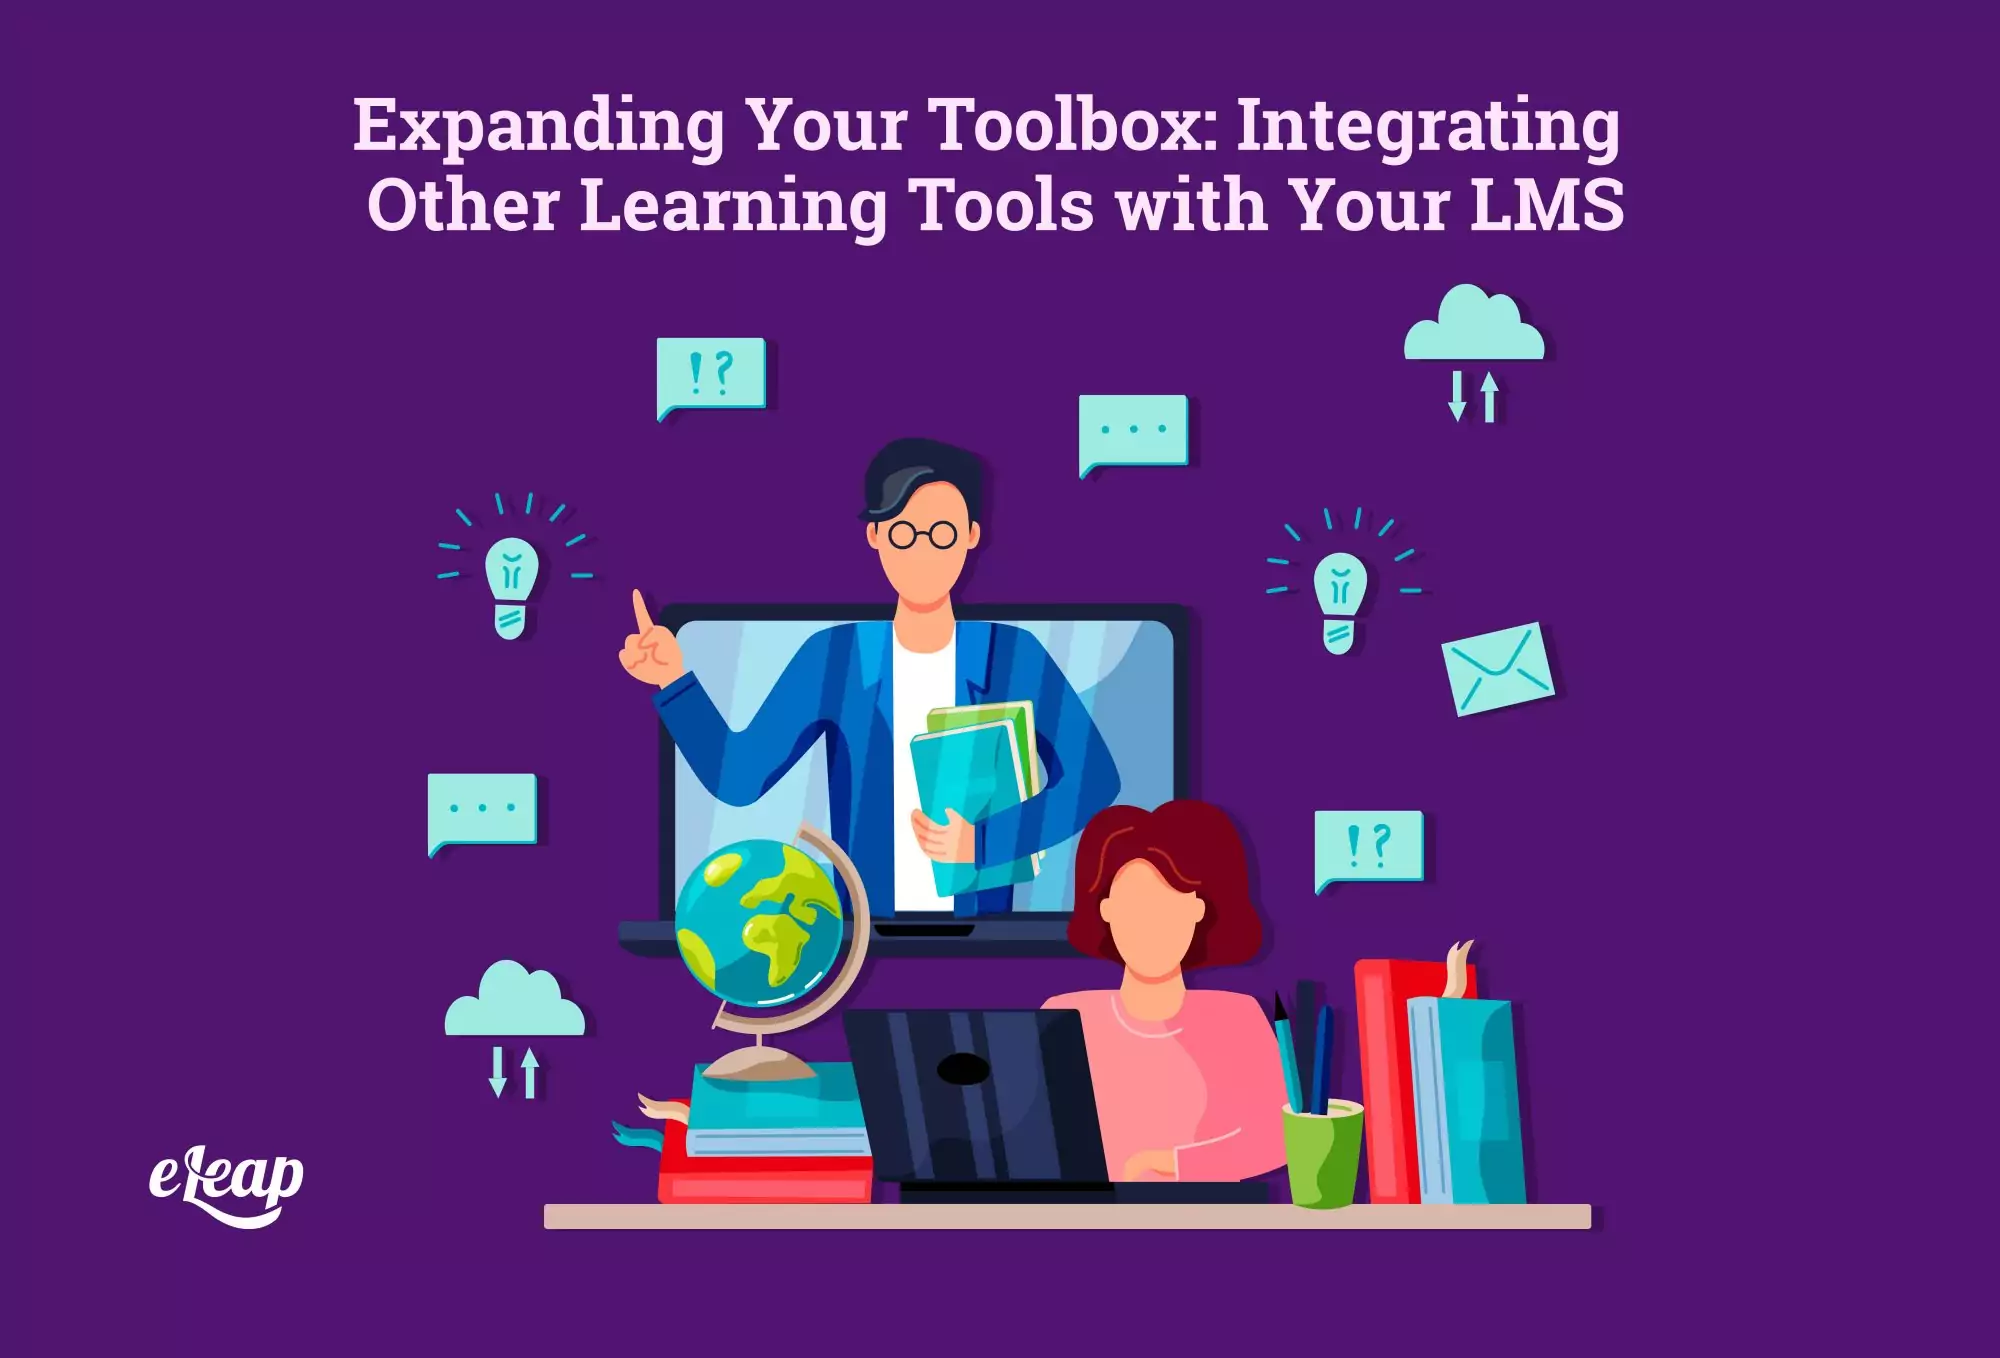 Expanding Your Toolbox: Integrating Other Learning Tools with Your LMS